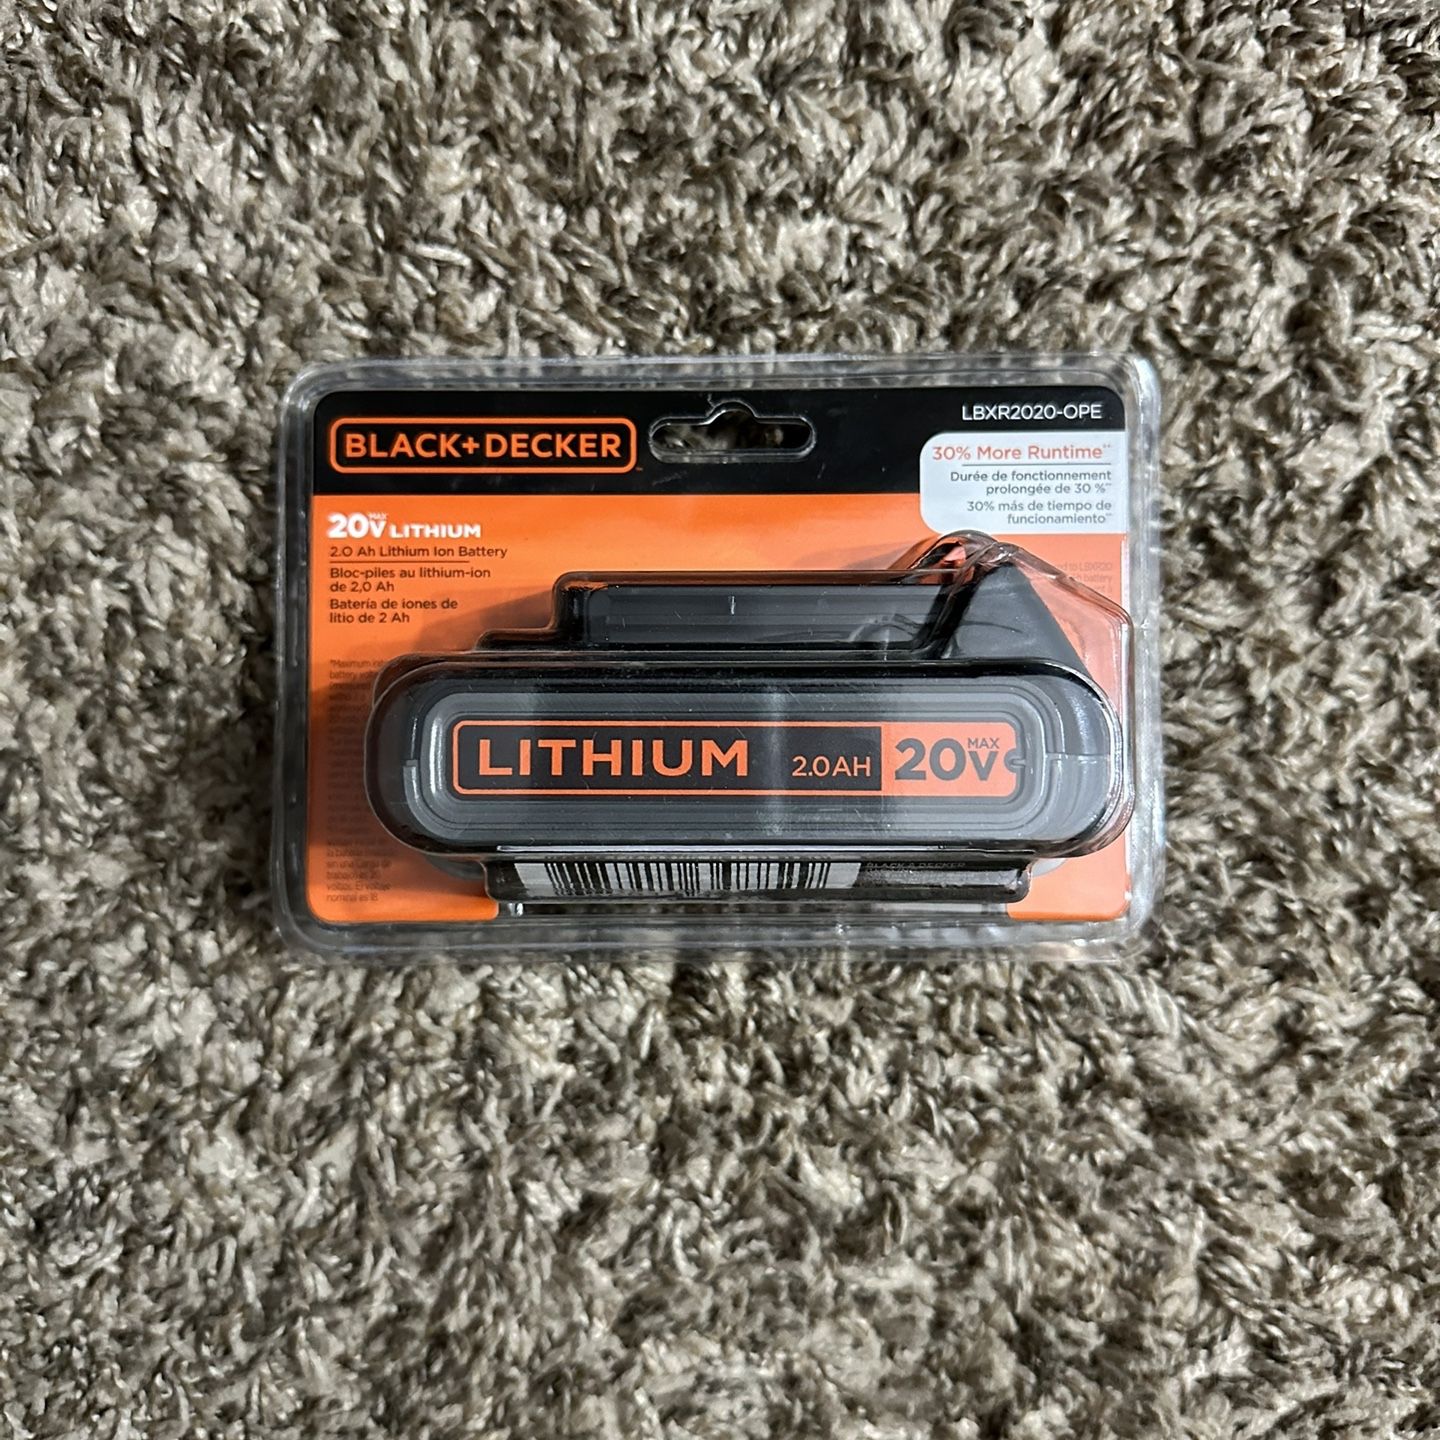 Black + Decker 20v Lithium Ion Battery for Sale in Siler City, NC - OfferUp